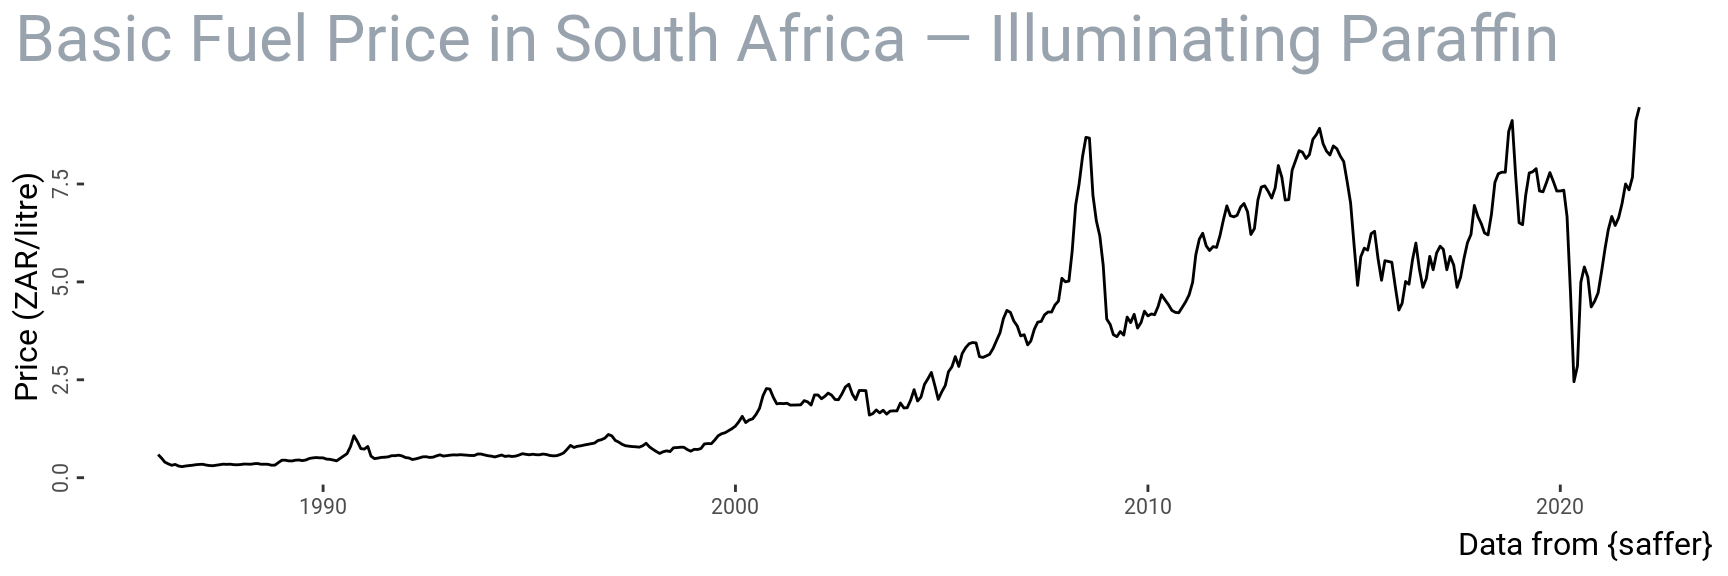 Basic fuel price for illuminating paraffin versus time in South Africa.